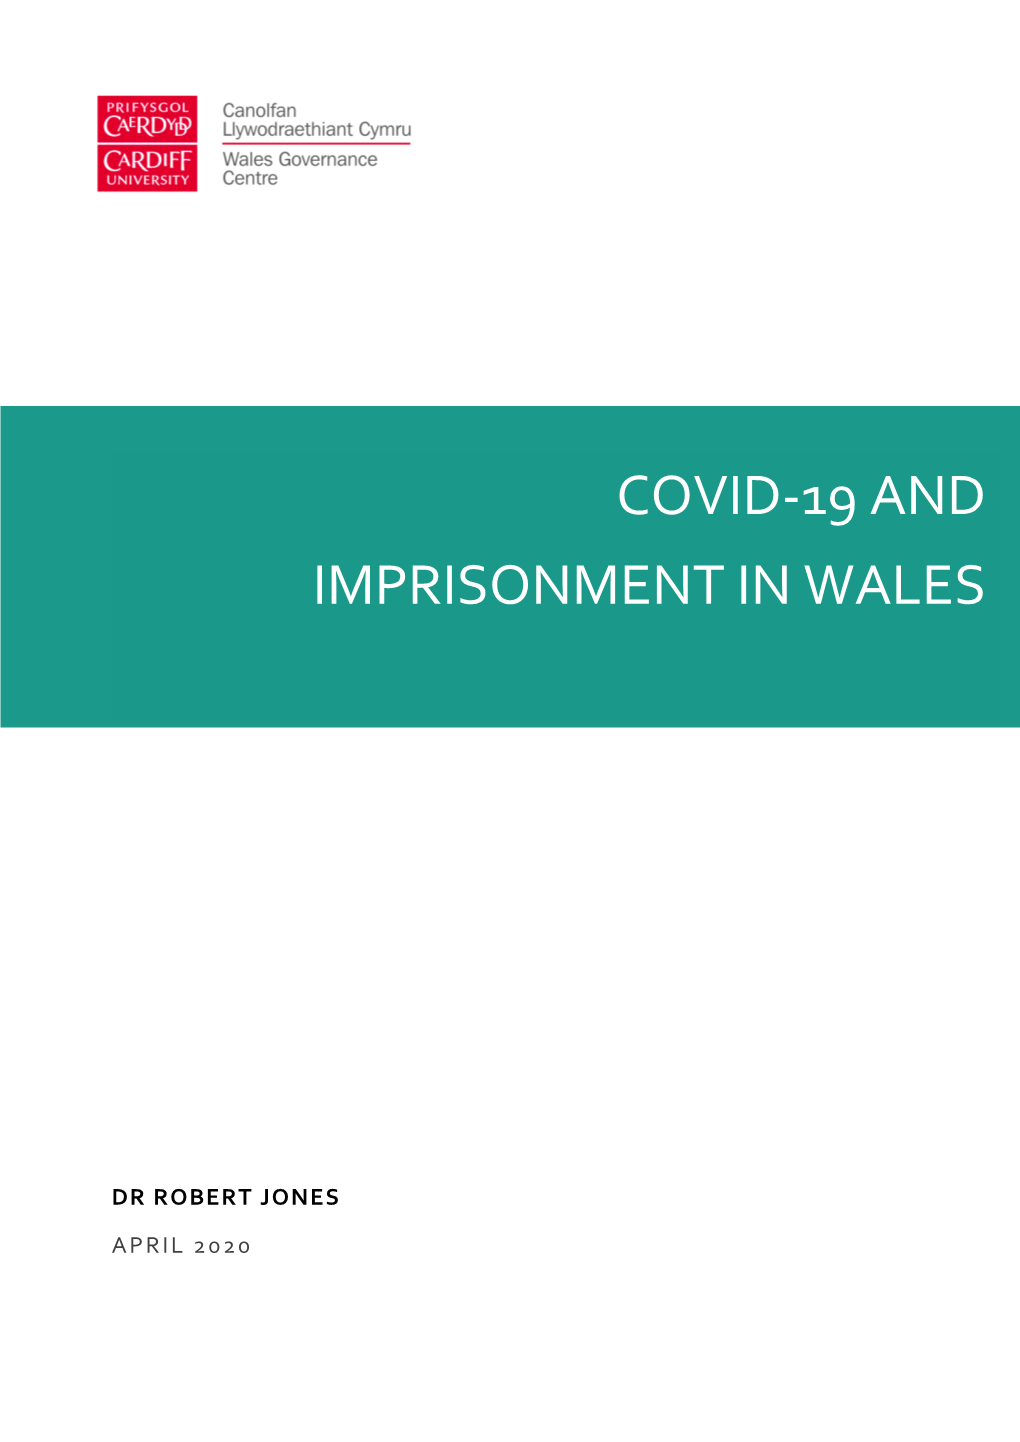 Covid-19 and Imprisonment in Wales